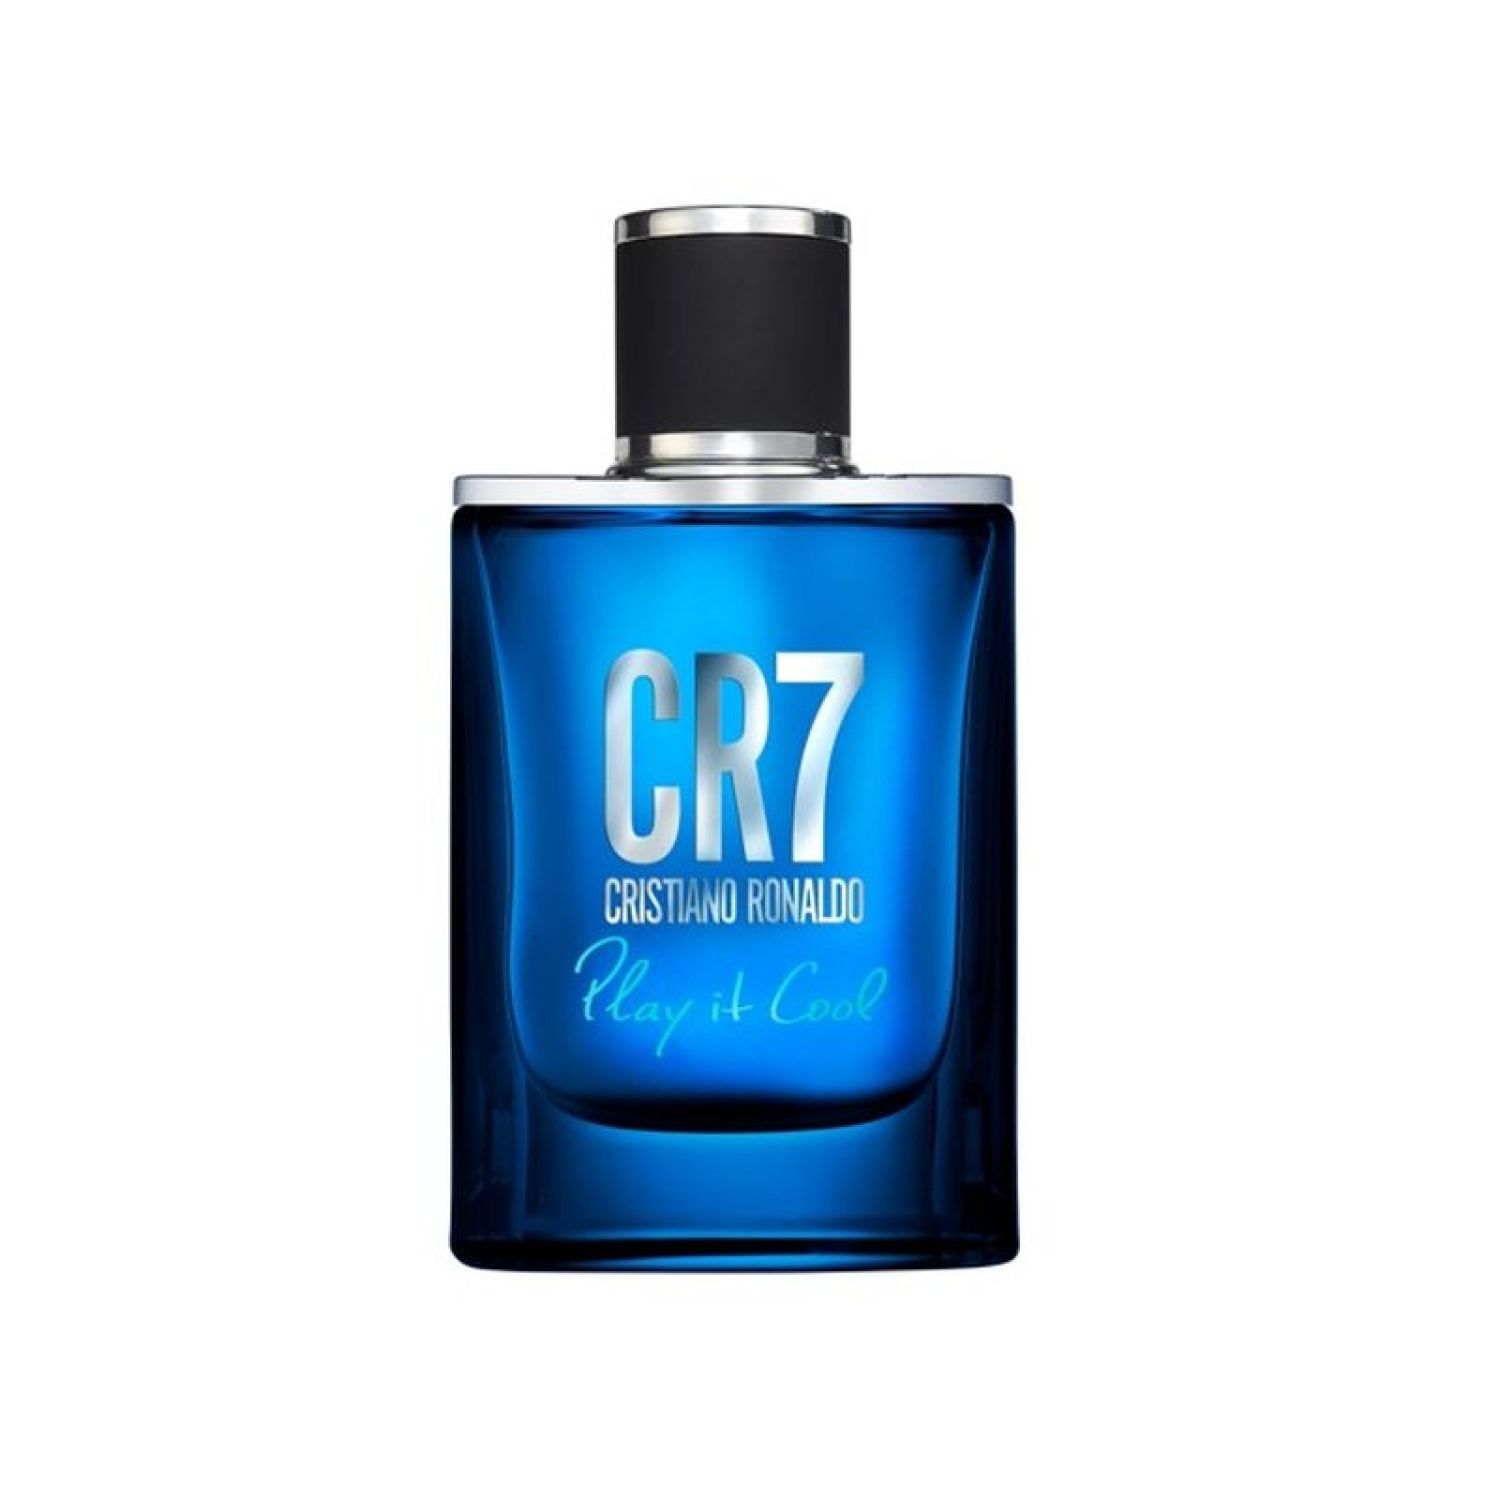 CR7 Play It Cool EDT 30 ml